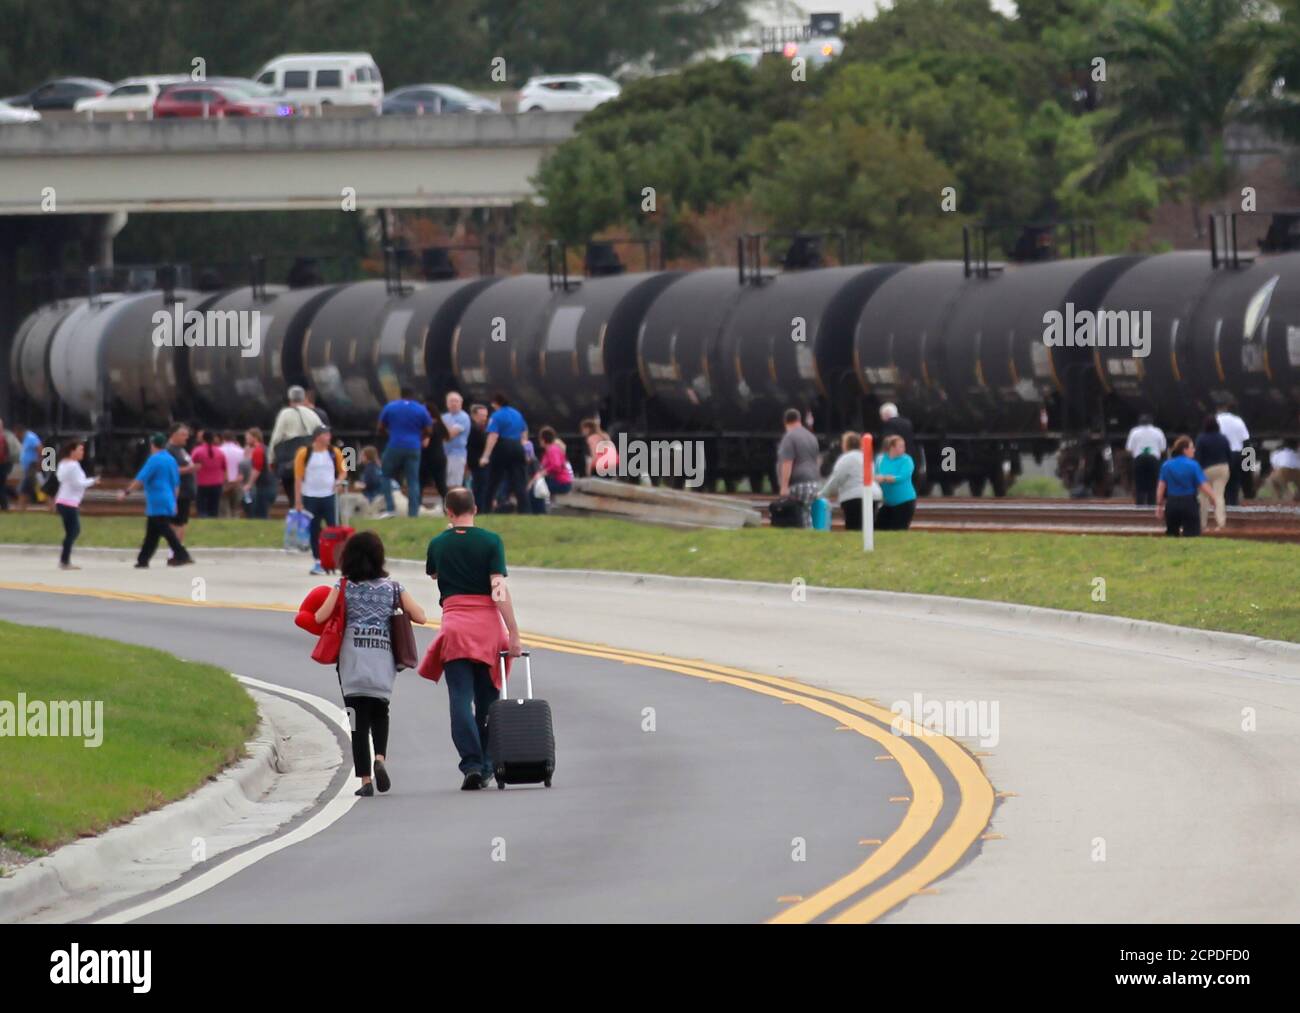 People exit the airport perimeter following a shooting incident at Fort Lauderdale-Hollywood International Airport in Fort Lauderdale, Florida, U.S. January 6, 2017. REUTERS/Andrew Innerarity Stock Photo